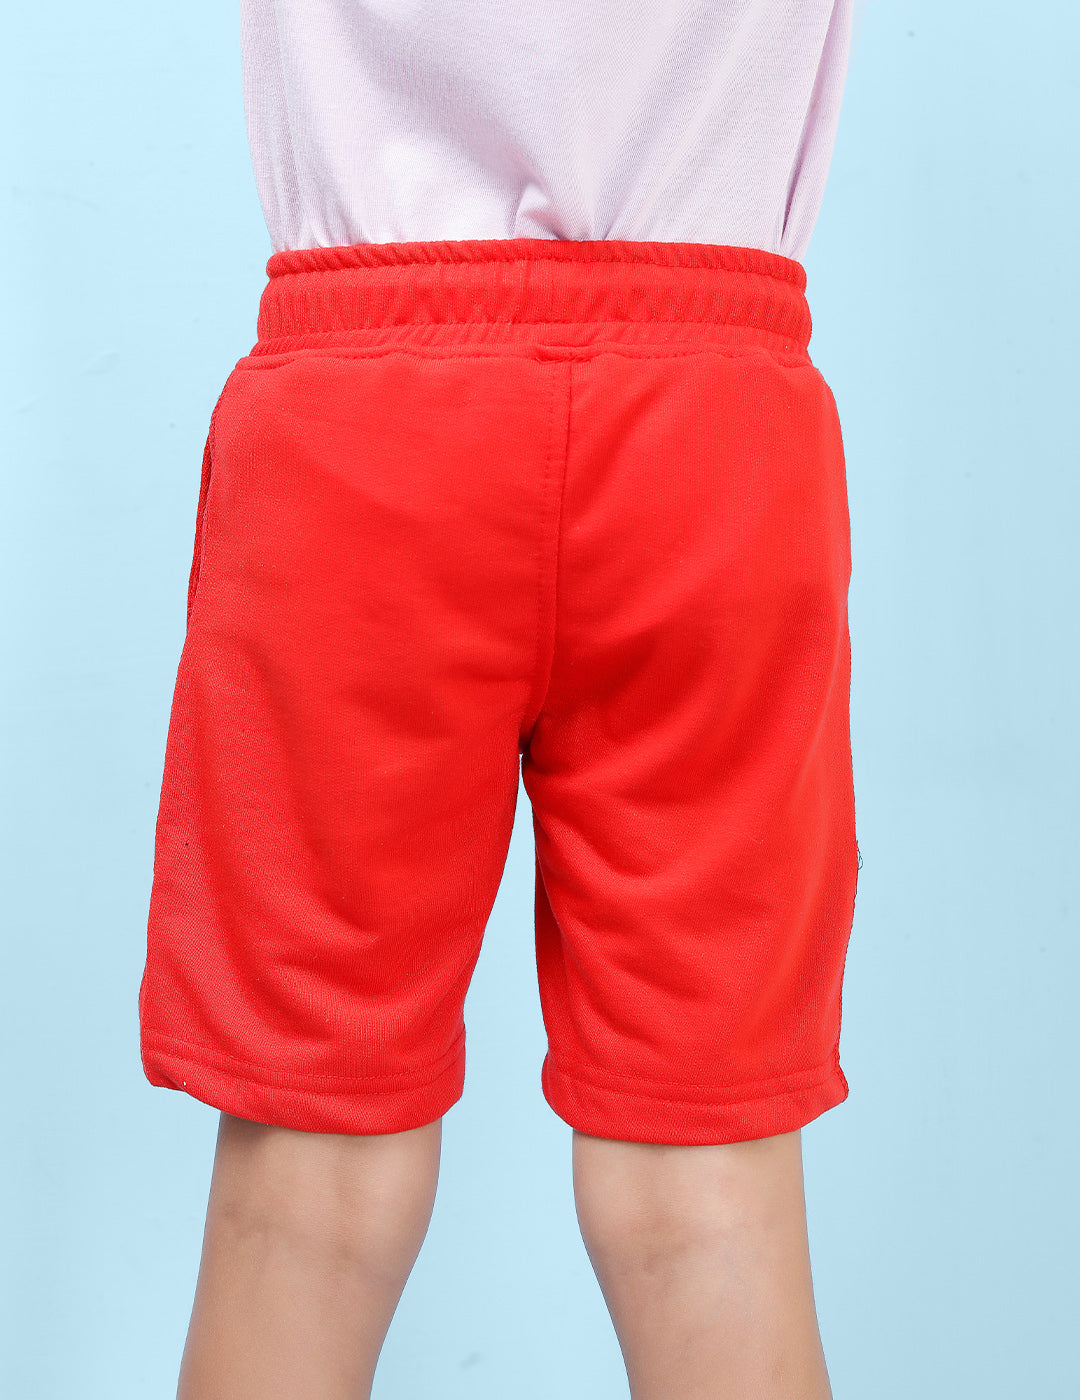 Nusyl Too Lazy Printed Red Boys Shorts